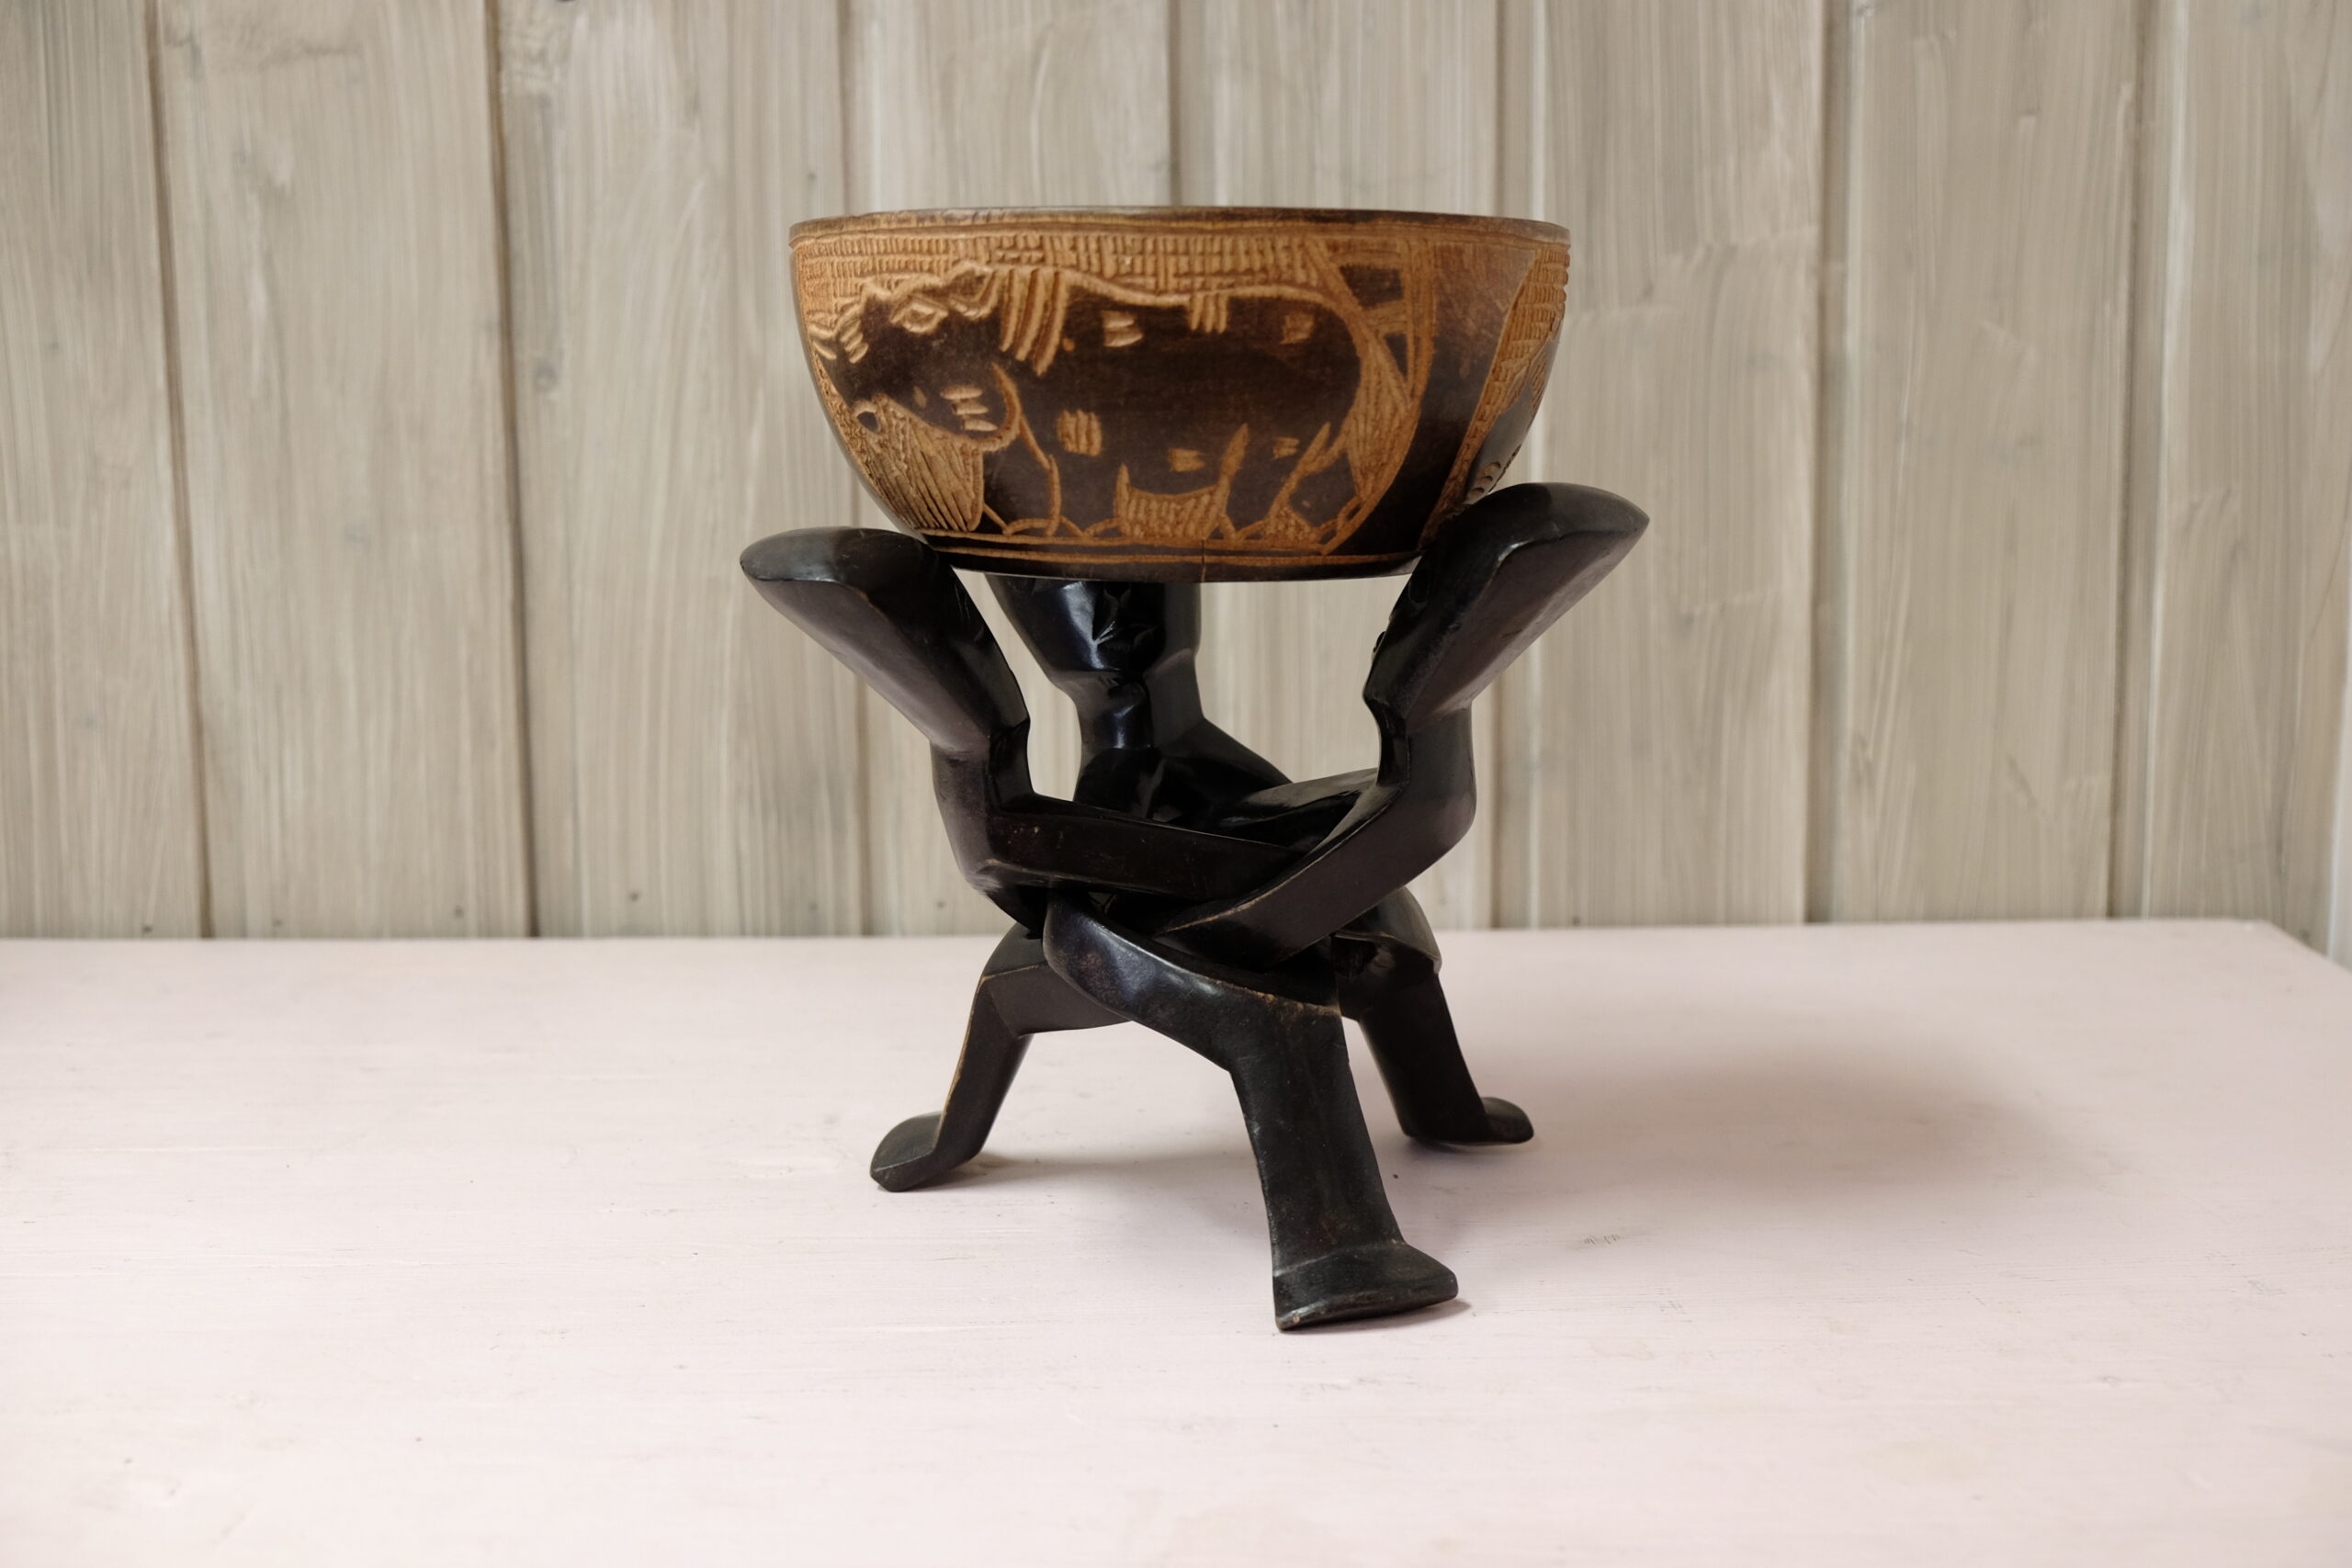 Ebony wooden bowl with intertwined sculptures